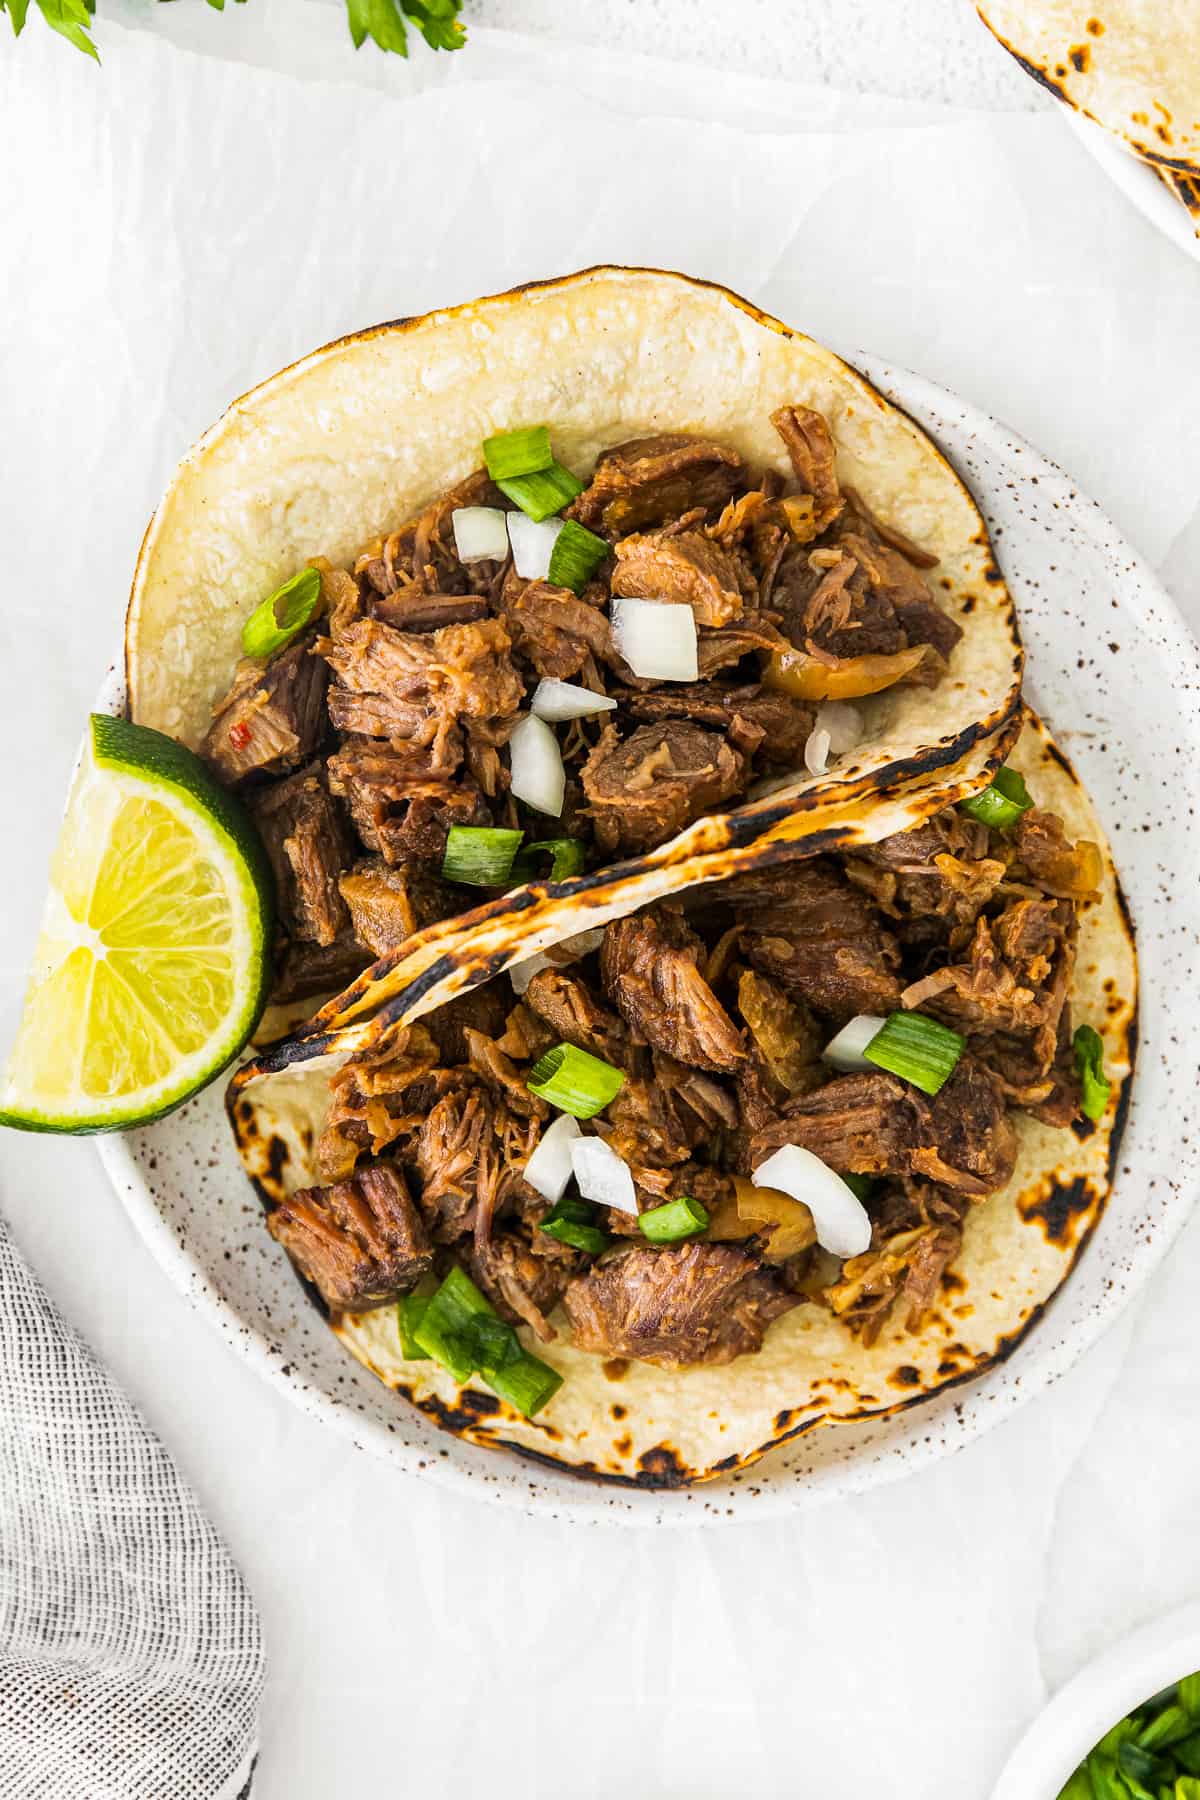 Taco Tuesday 2-Quart Red Round Slow Cooker at